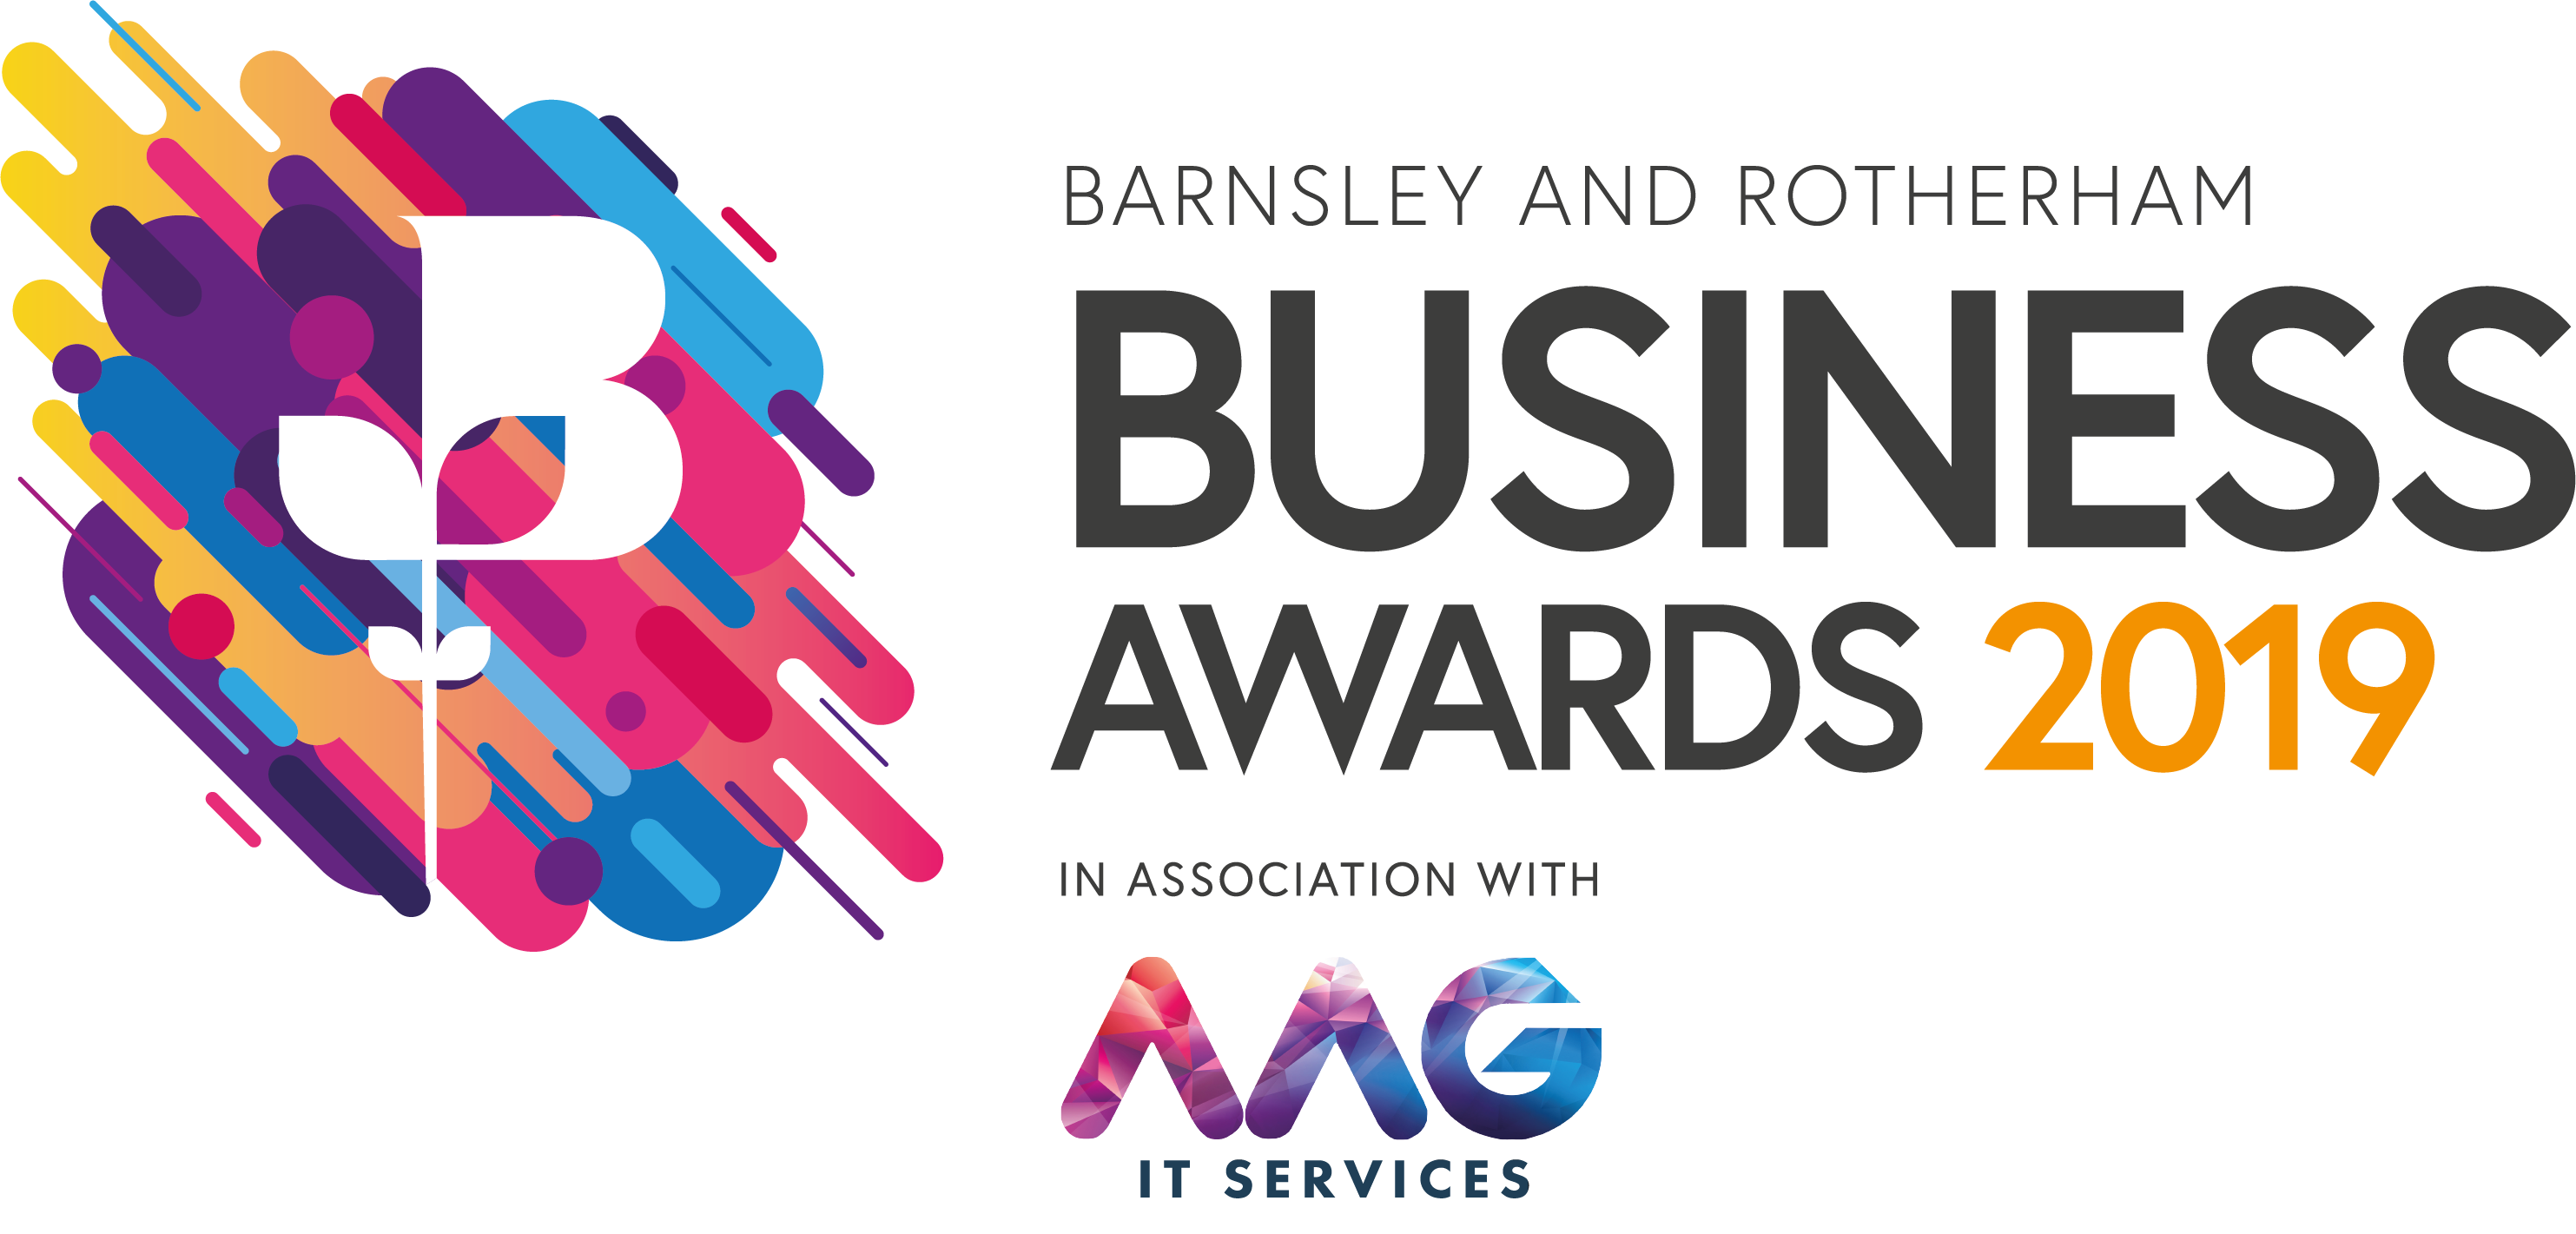 Shortlist announced for Barnsley and Rotherham Business Awards